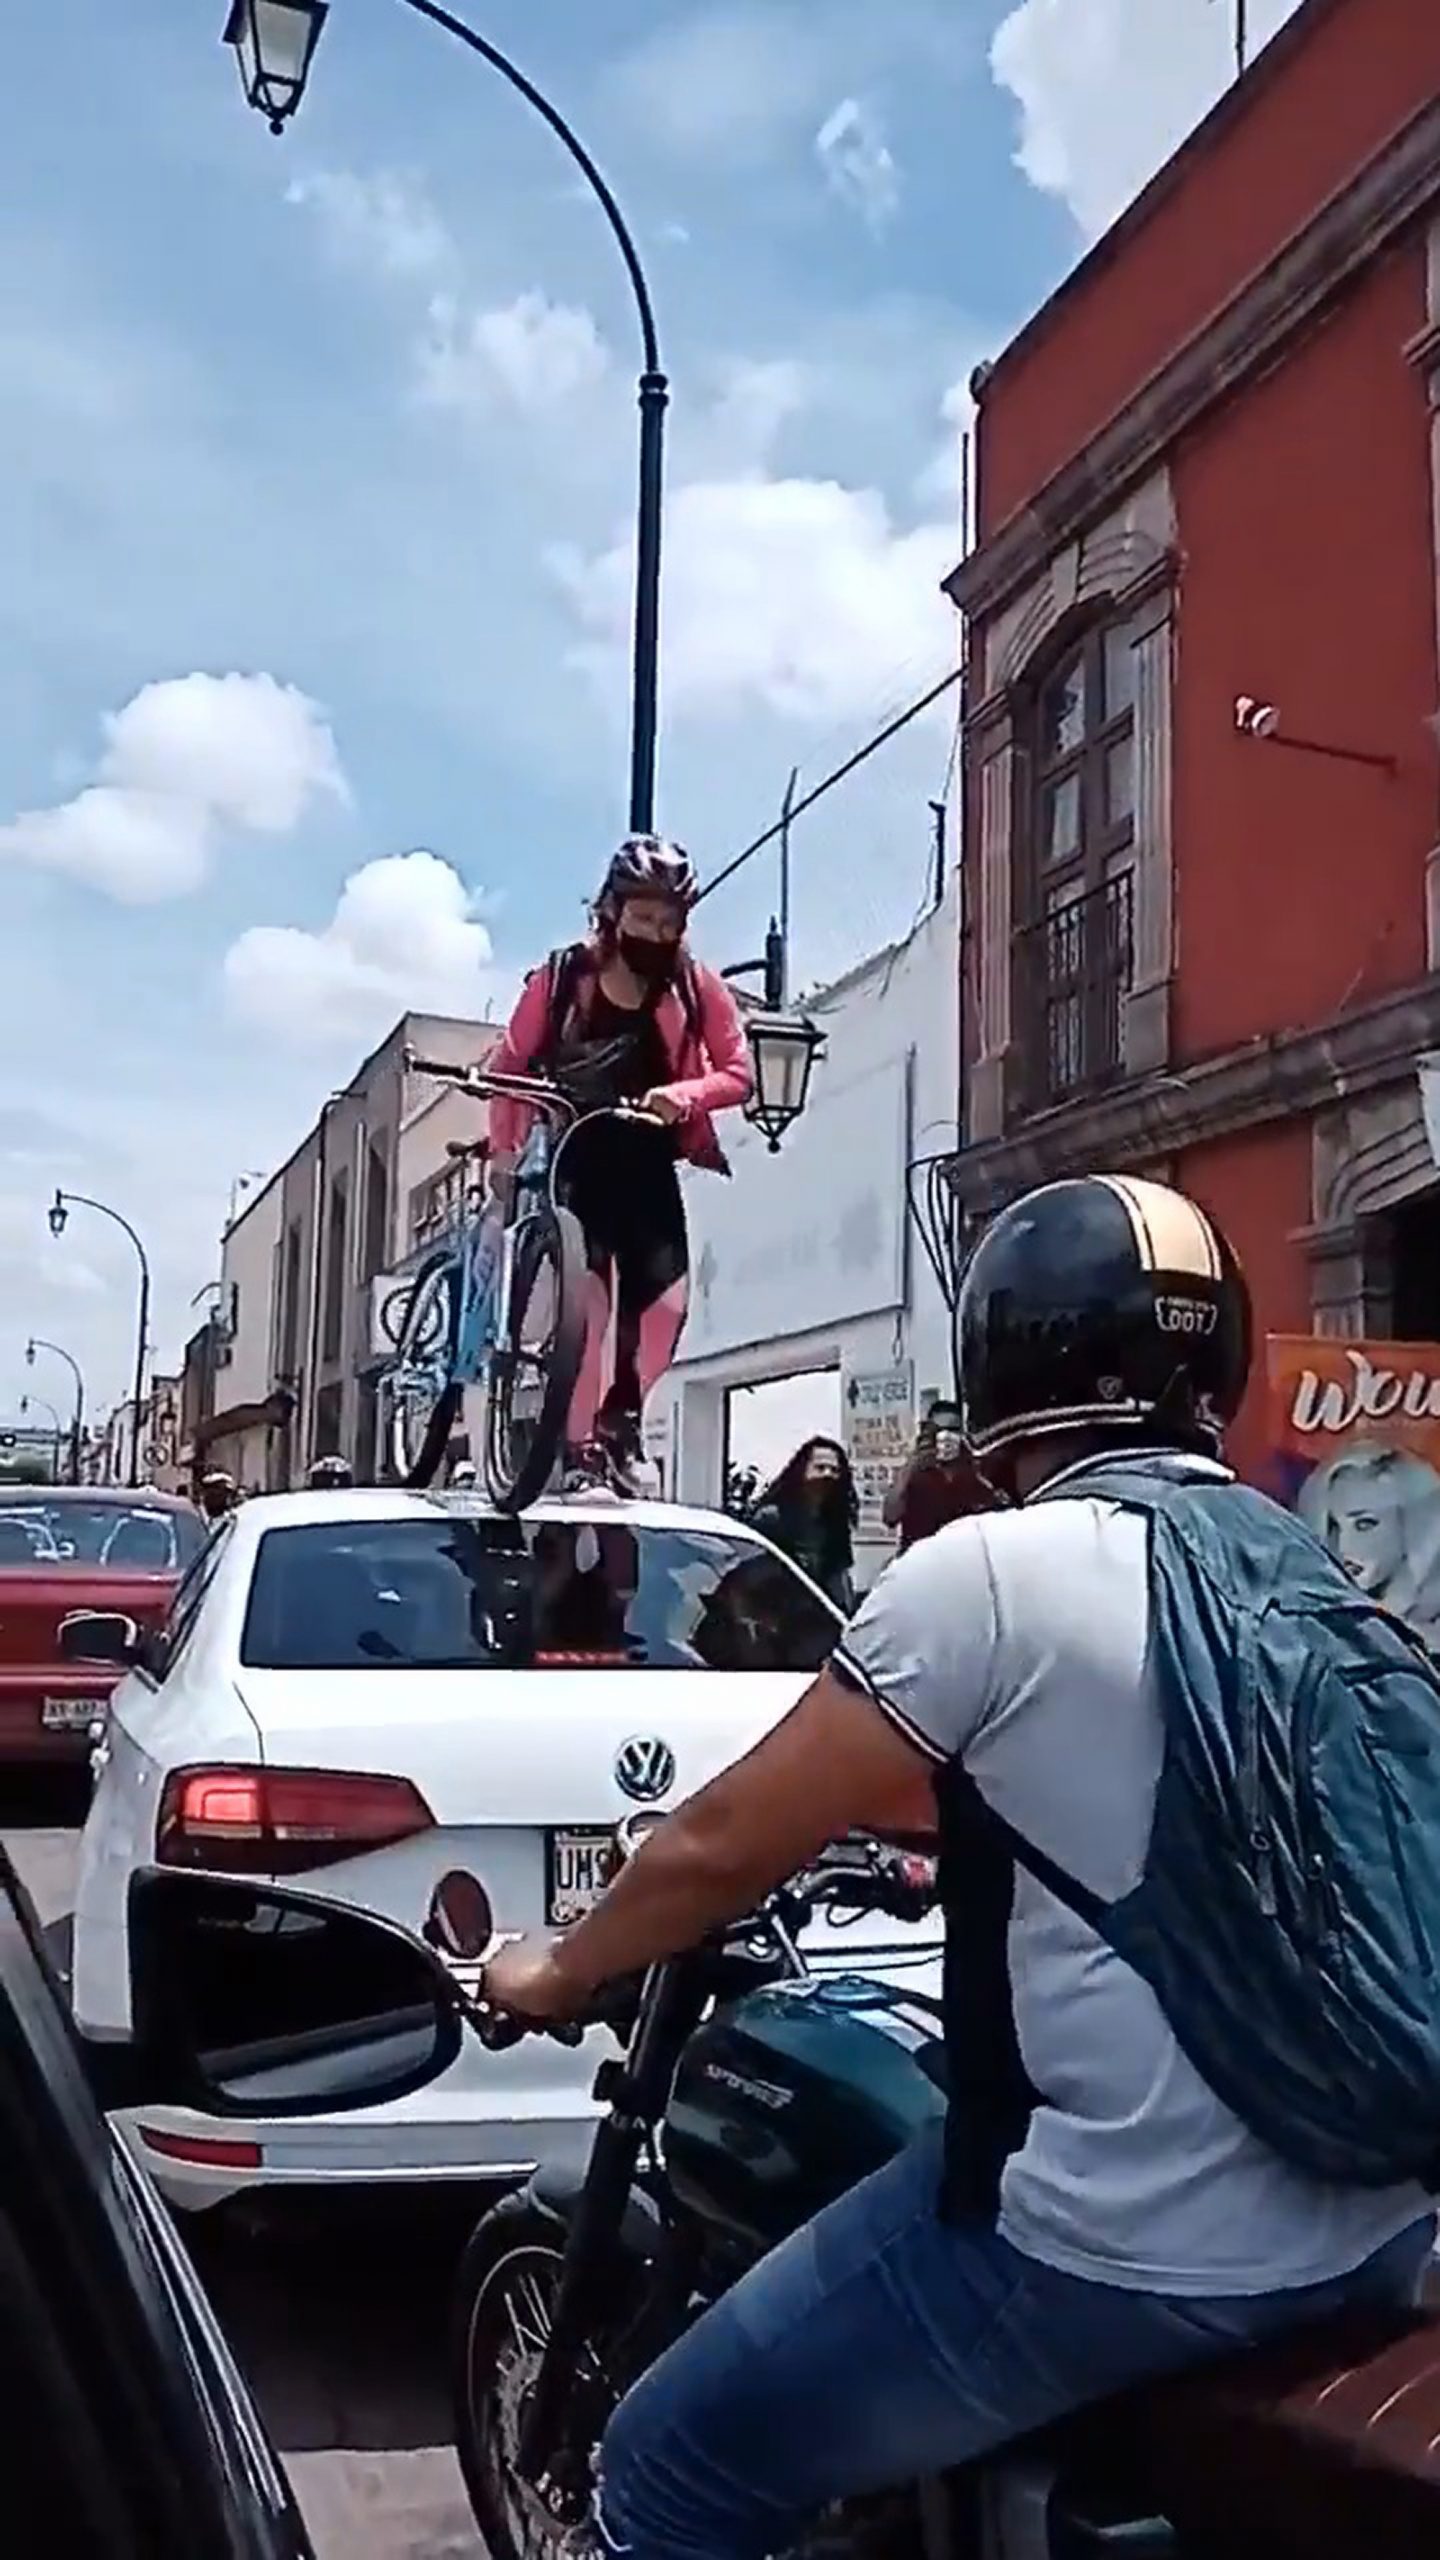 Read more about the article Angry Cyclist Stomps On Parked Car In Cycling Lane In Protest